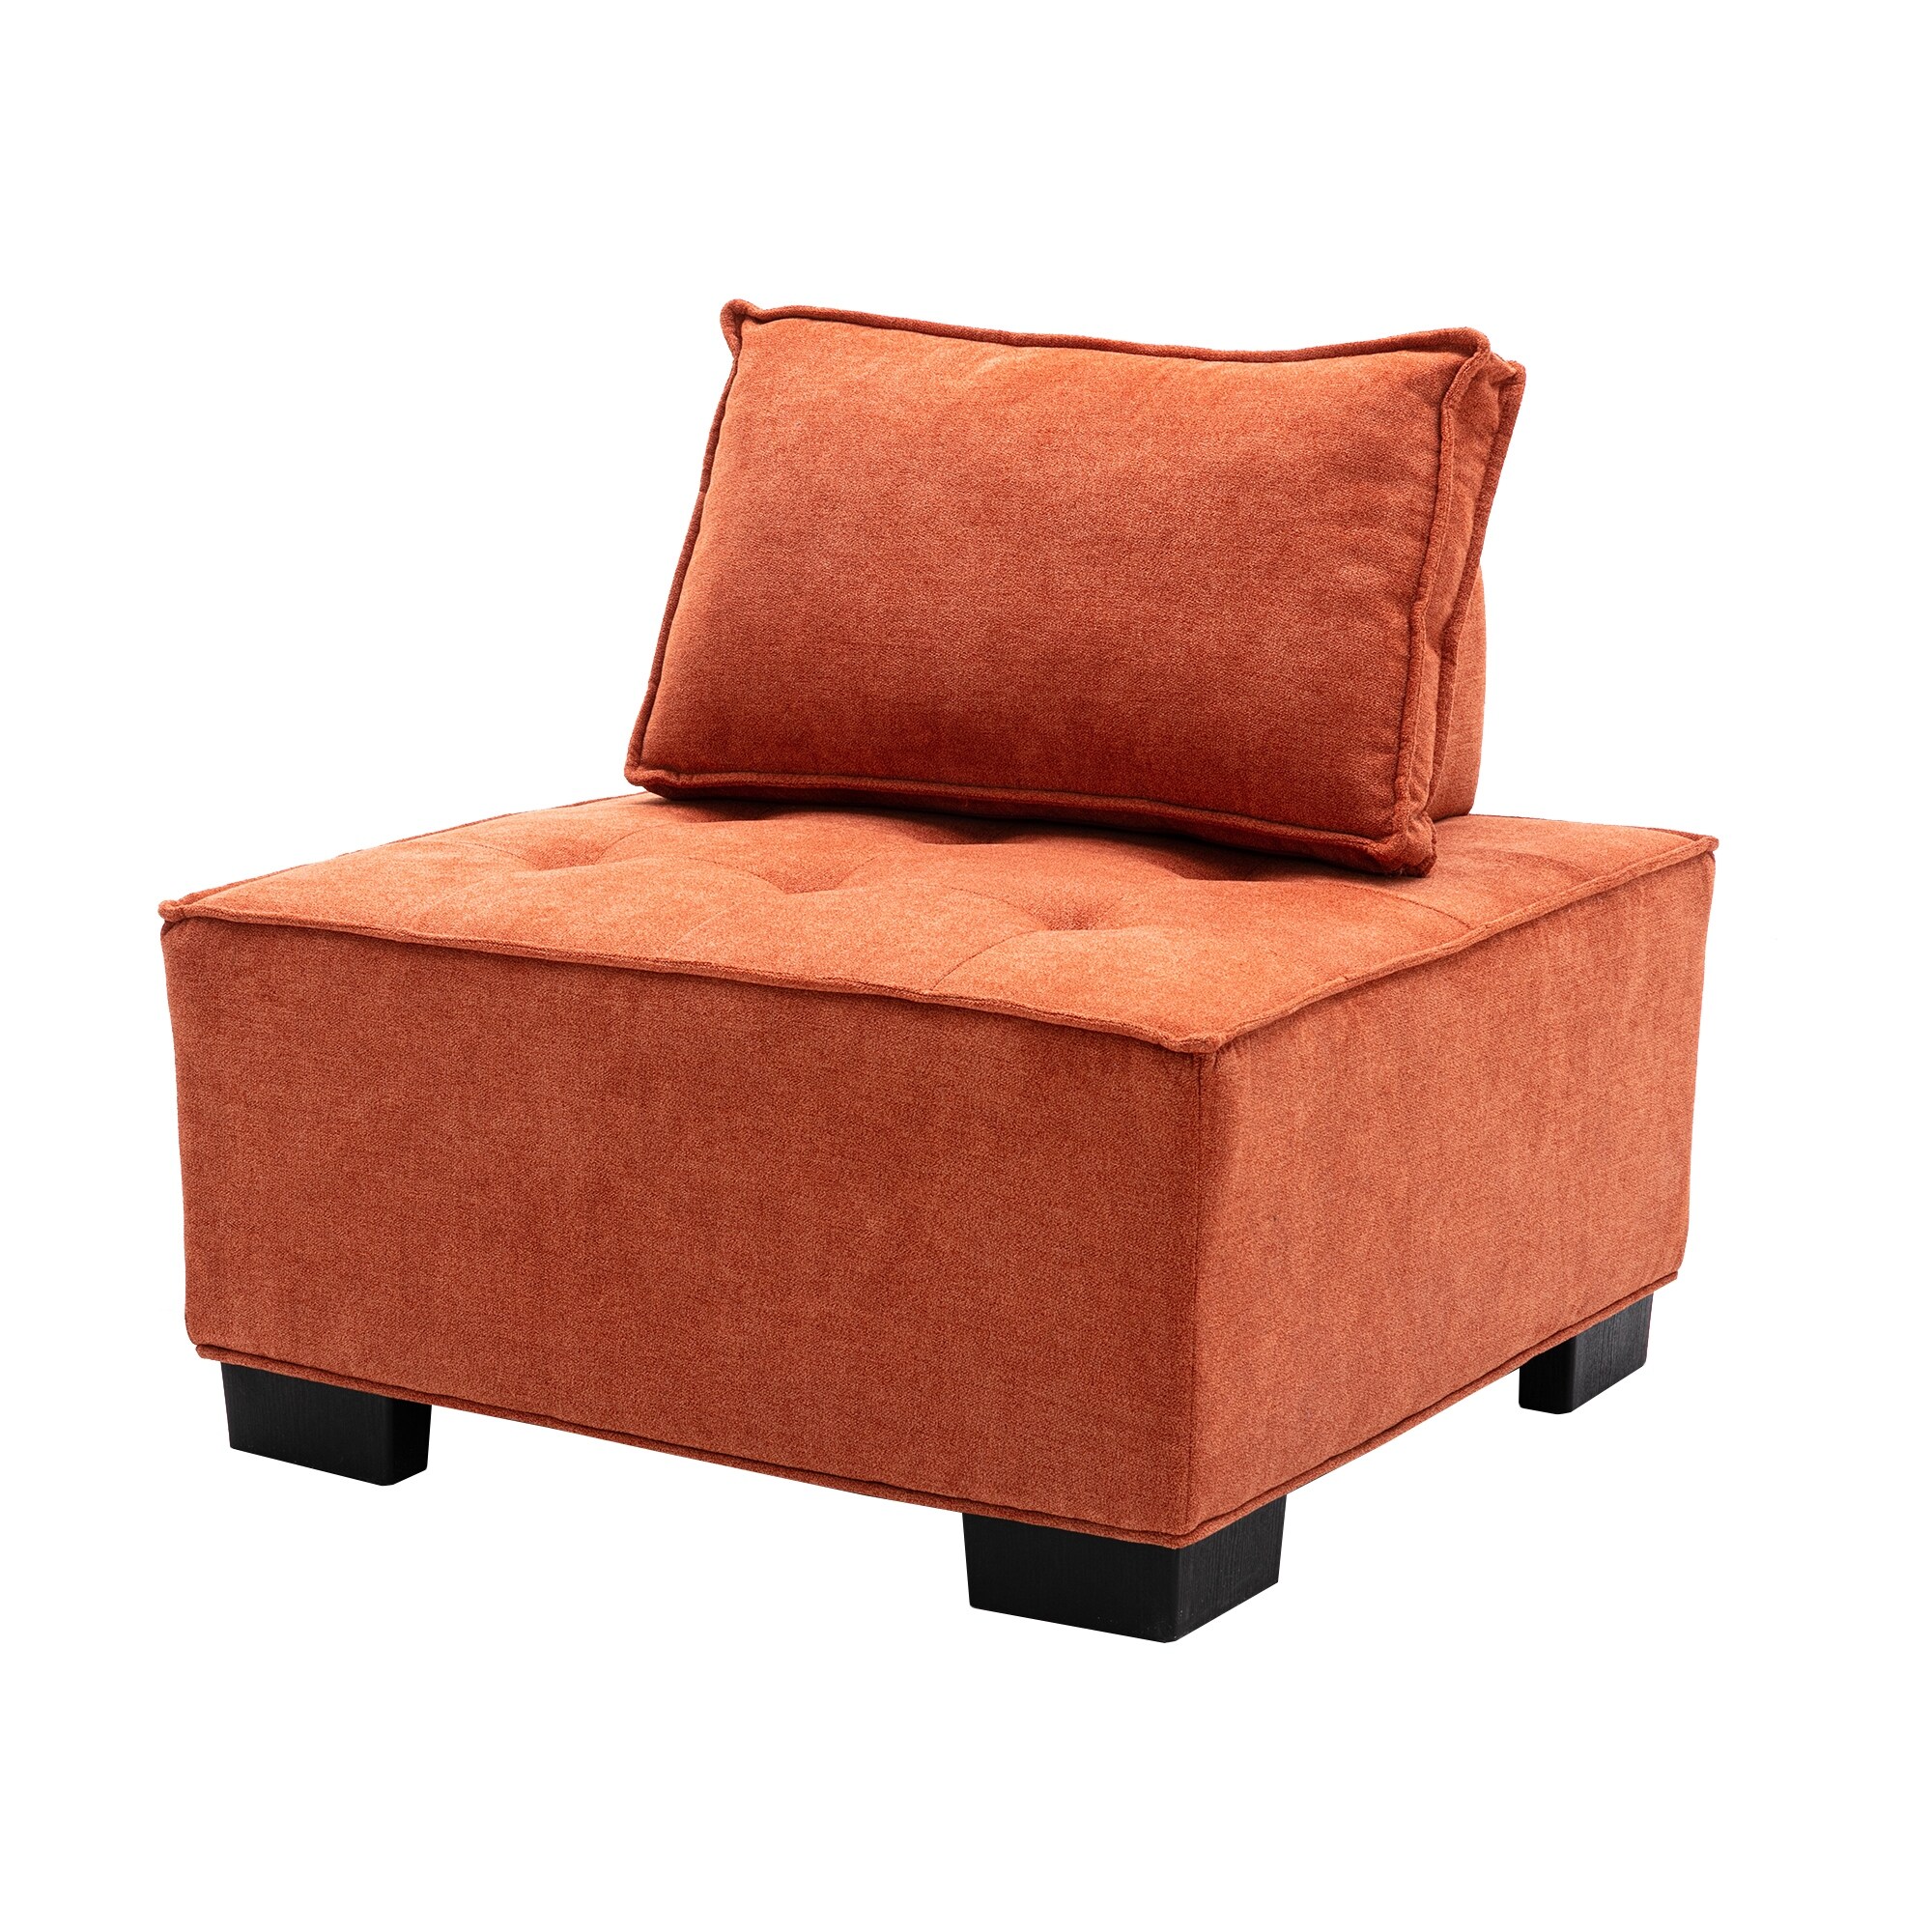 30.41" W Polyester Fabric Upholstered Barral Chair with Pillow Back, Ottoman with Thick Foam Padded and Curved Edges Design